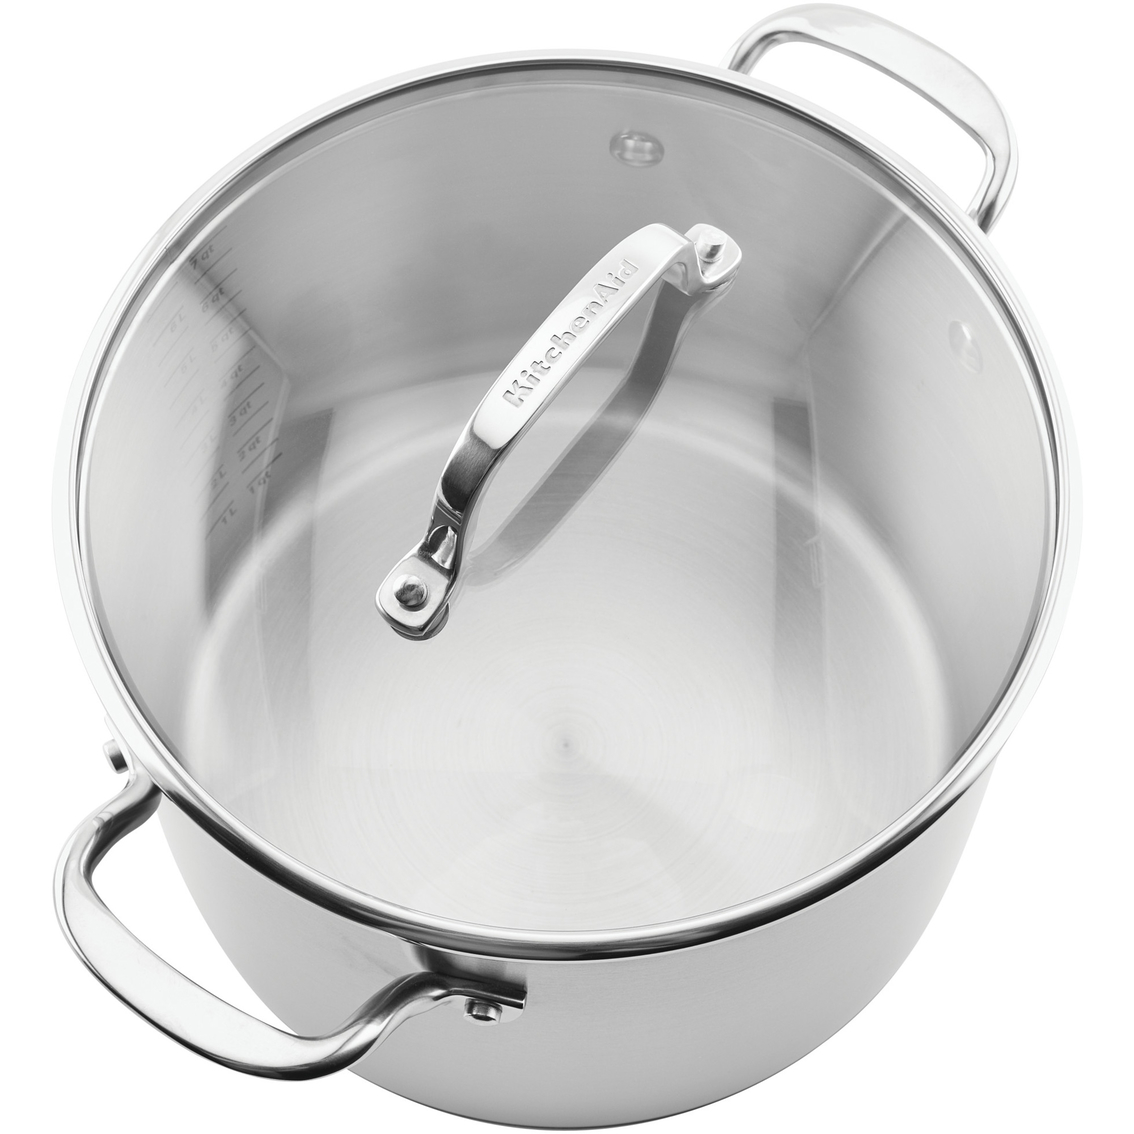 KitchenAid 8 qt. 3 Ply Base Stainless Steel Stockpot with Measuring Marks and Lid - Image 3 of 10